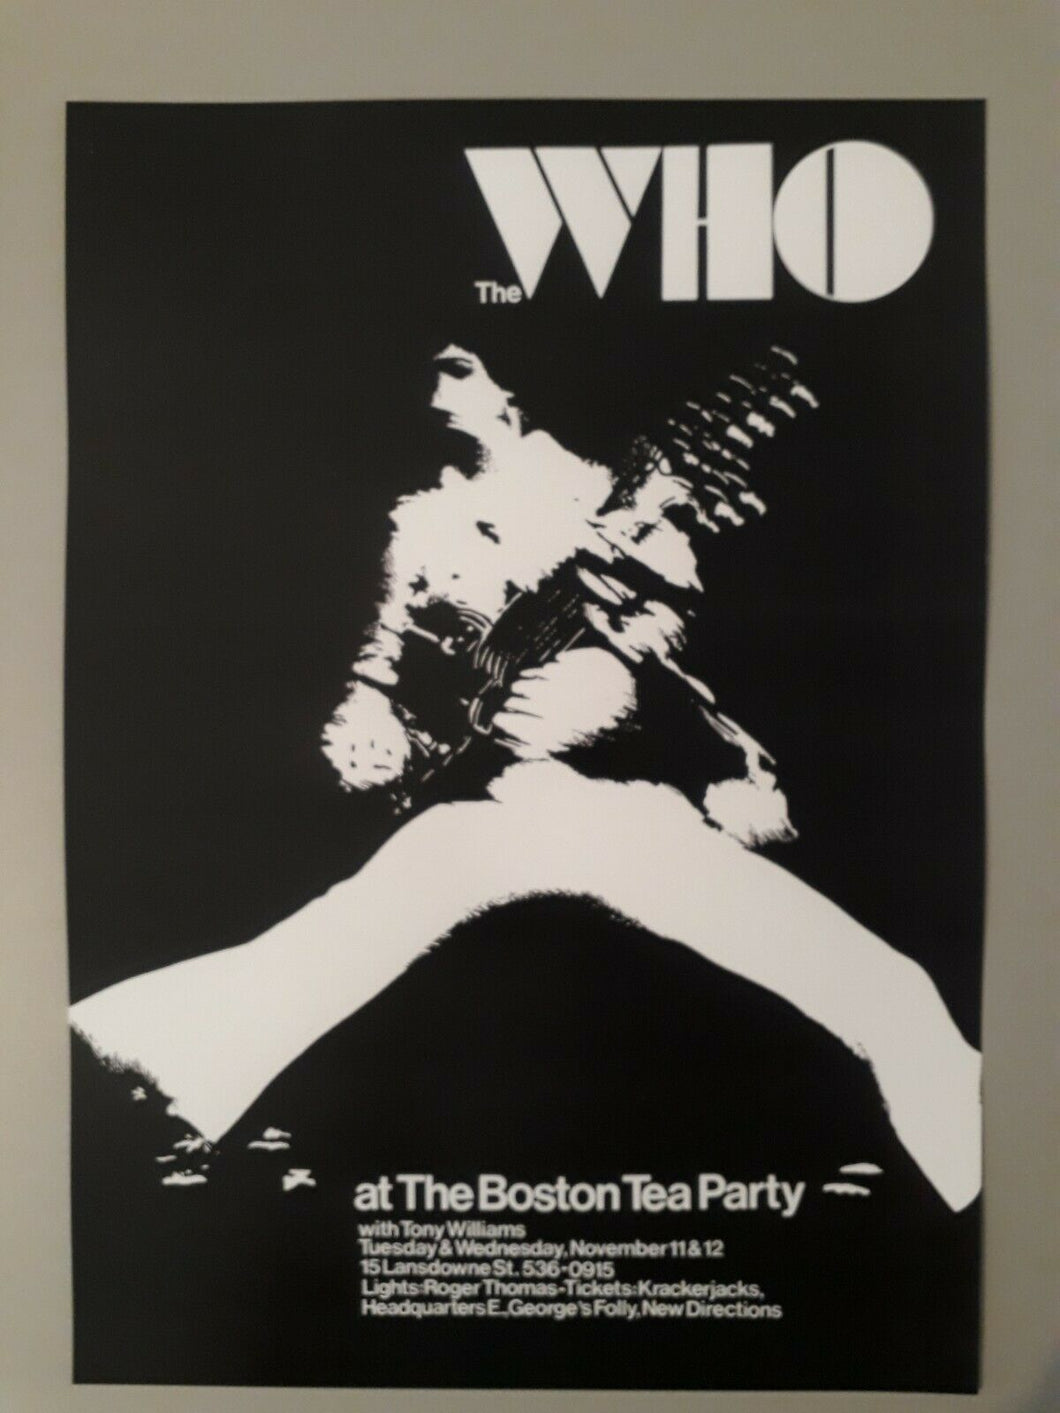 The Who poster - Live at the Boston Tea Party 1969 new reprinted edition A3 size - Original Music and Movie Posters for sale from Bamalama - Online Poster Store UK London